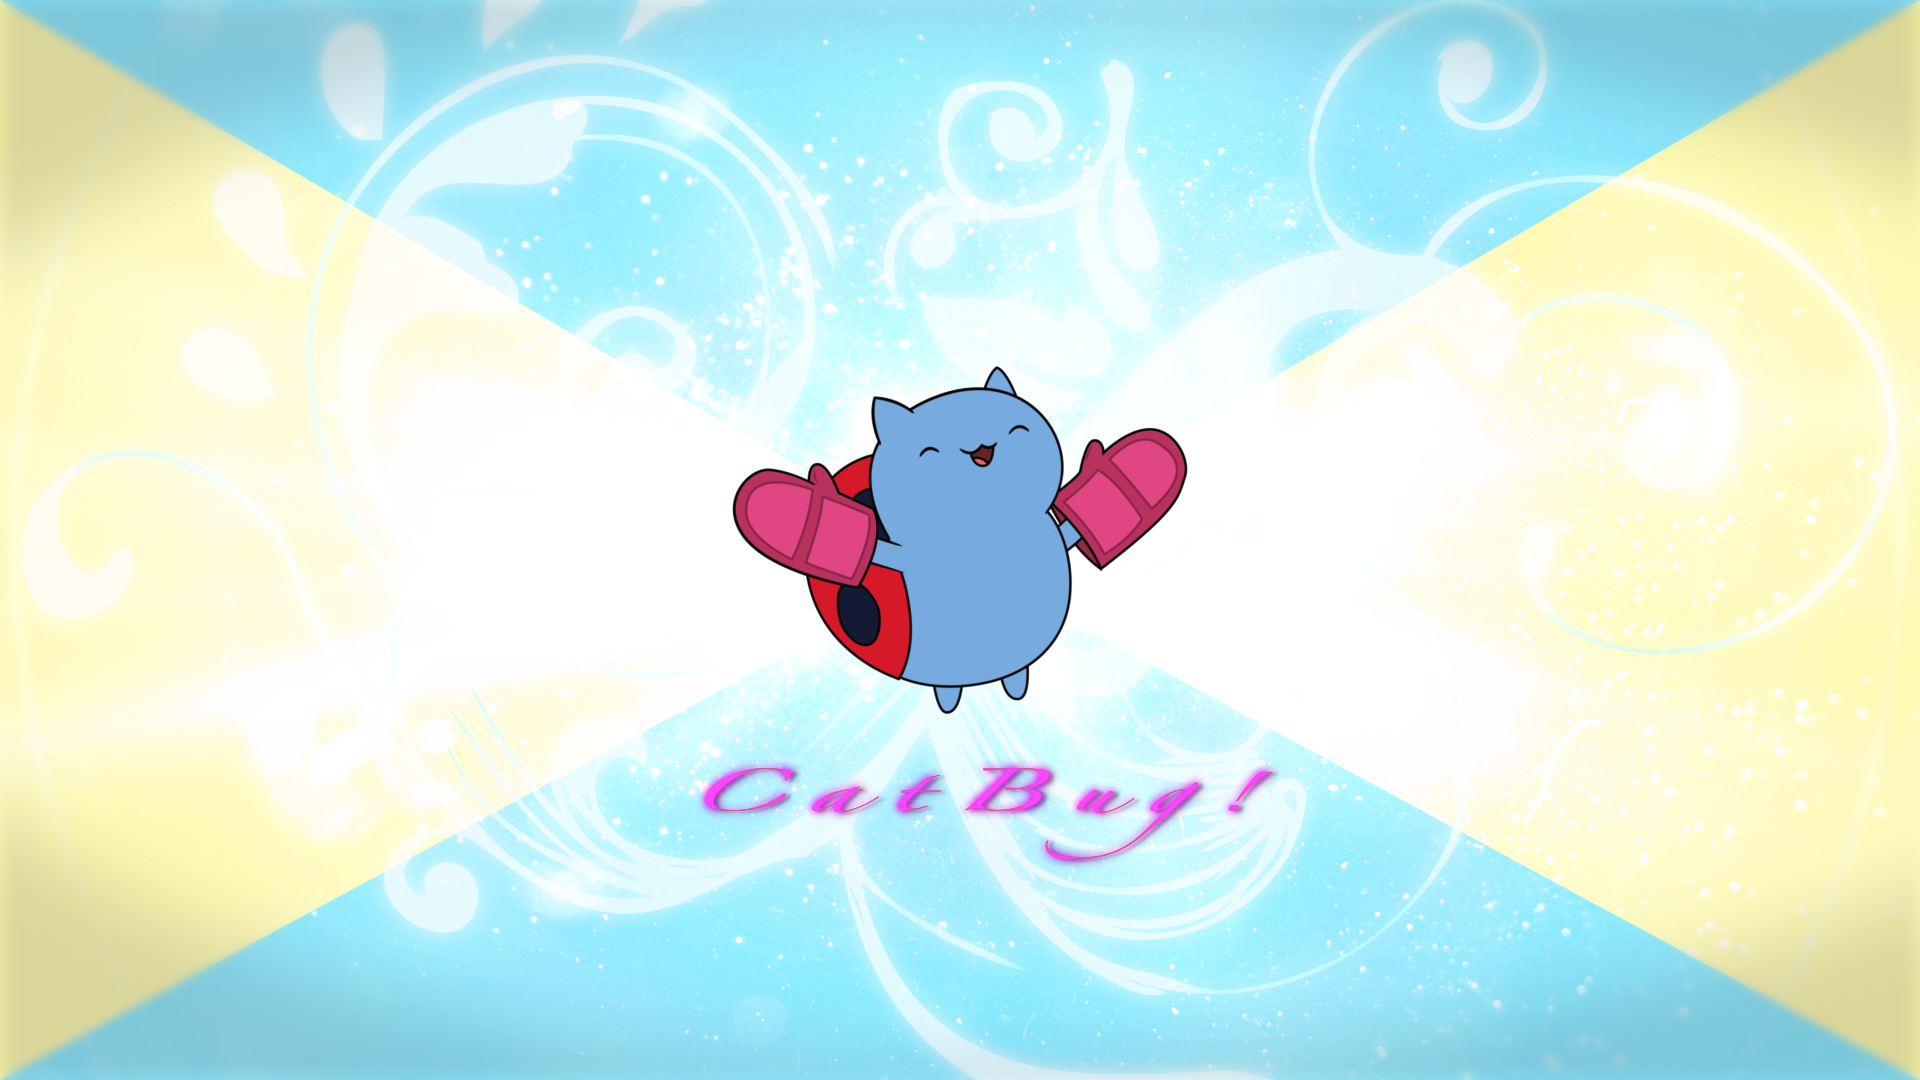 CatBug!!! | Wallpaper by CursyPon3